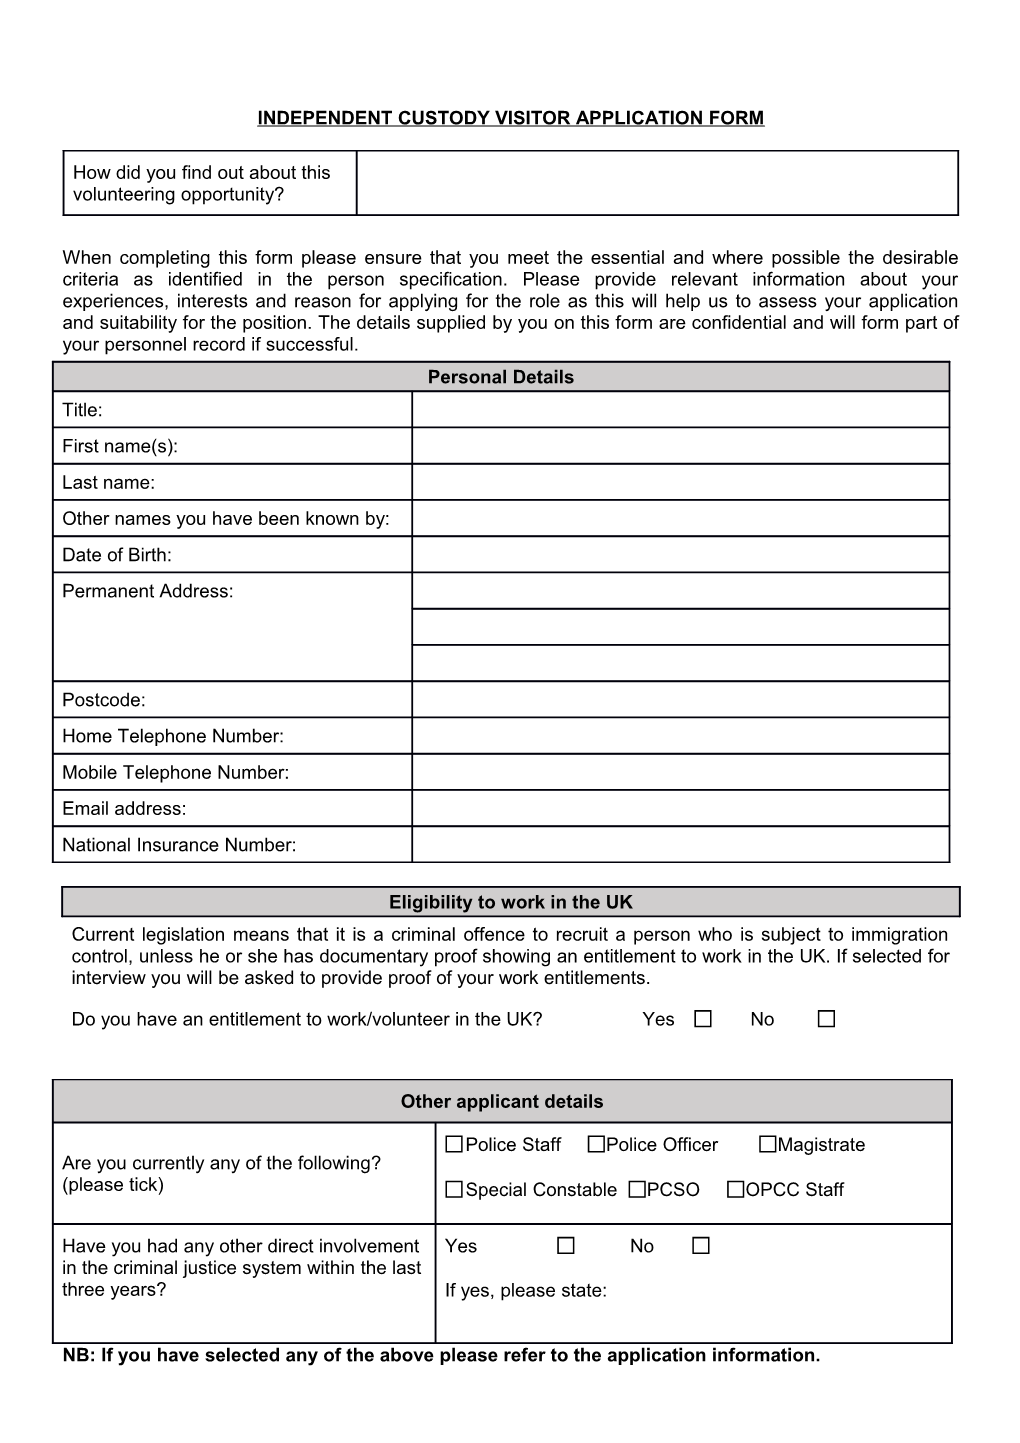 Independent Custody Visitor Application Form